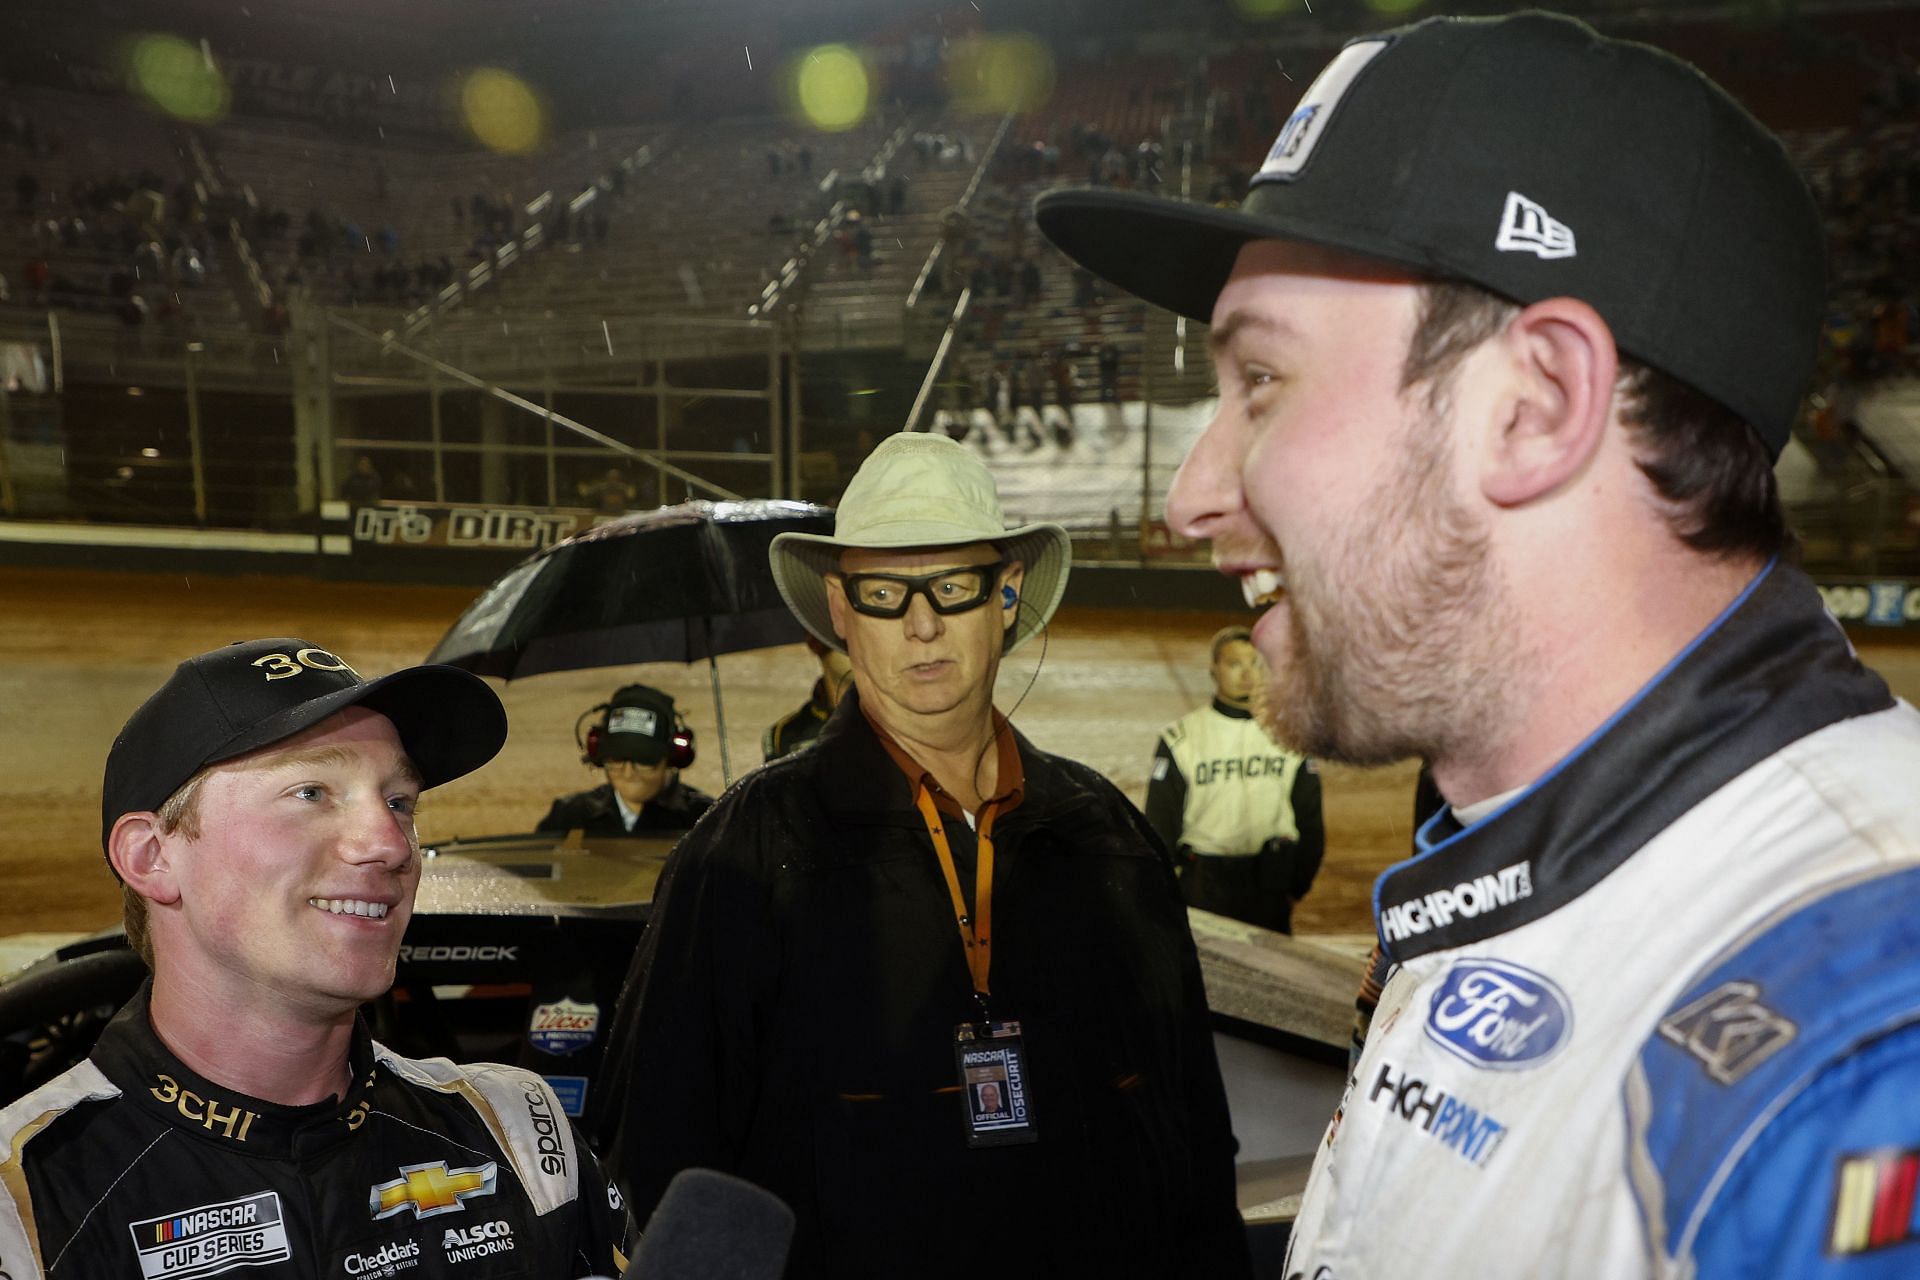 Tyler Reddick (Left) and Chase Briscoe (Right) talk after an on-track incident during the NASCAR Cup Series Food City Dirt Race at Bristol Motor Speedway.